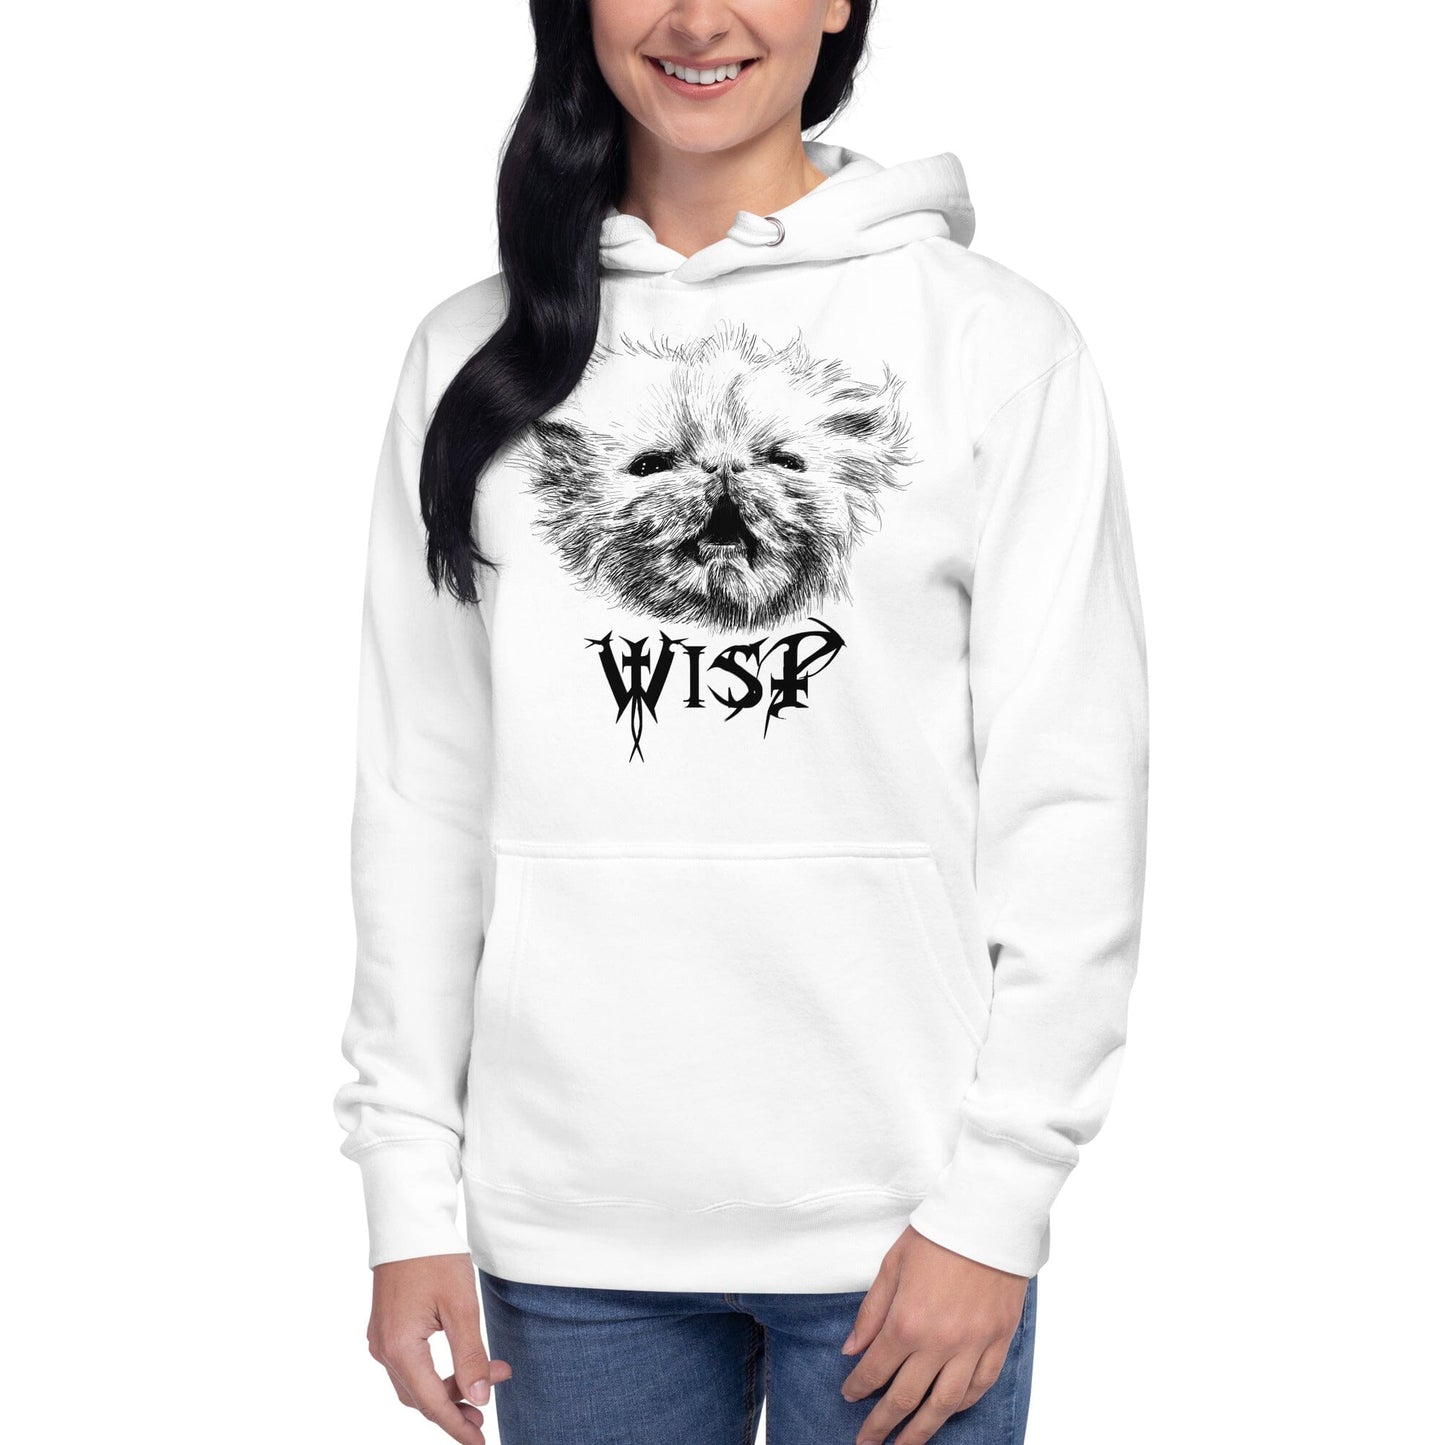 Metal Wisp Hoodie [Unfoiled] (All net proceeds go to Rags to Riches Animal Rescue) JoyousJoyfulJoyness White S 